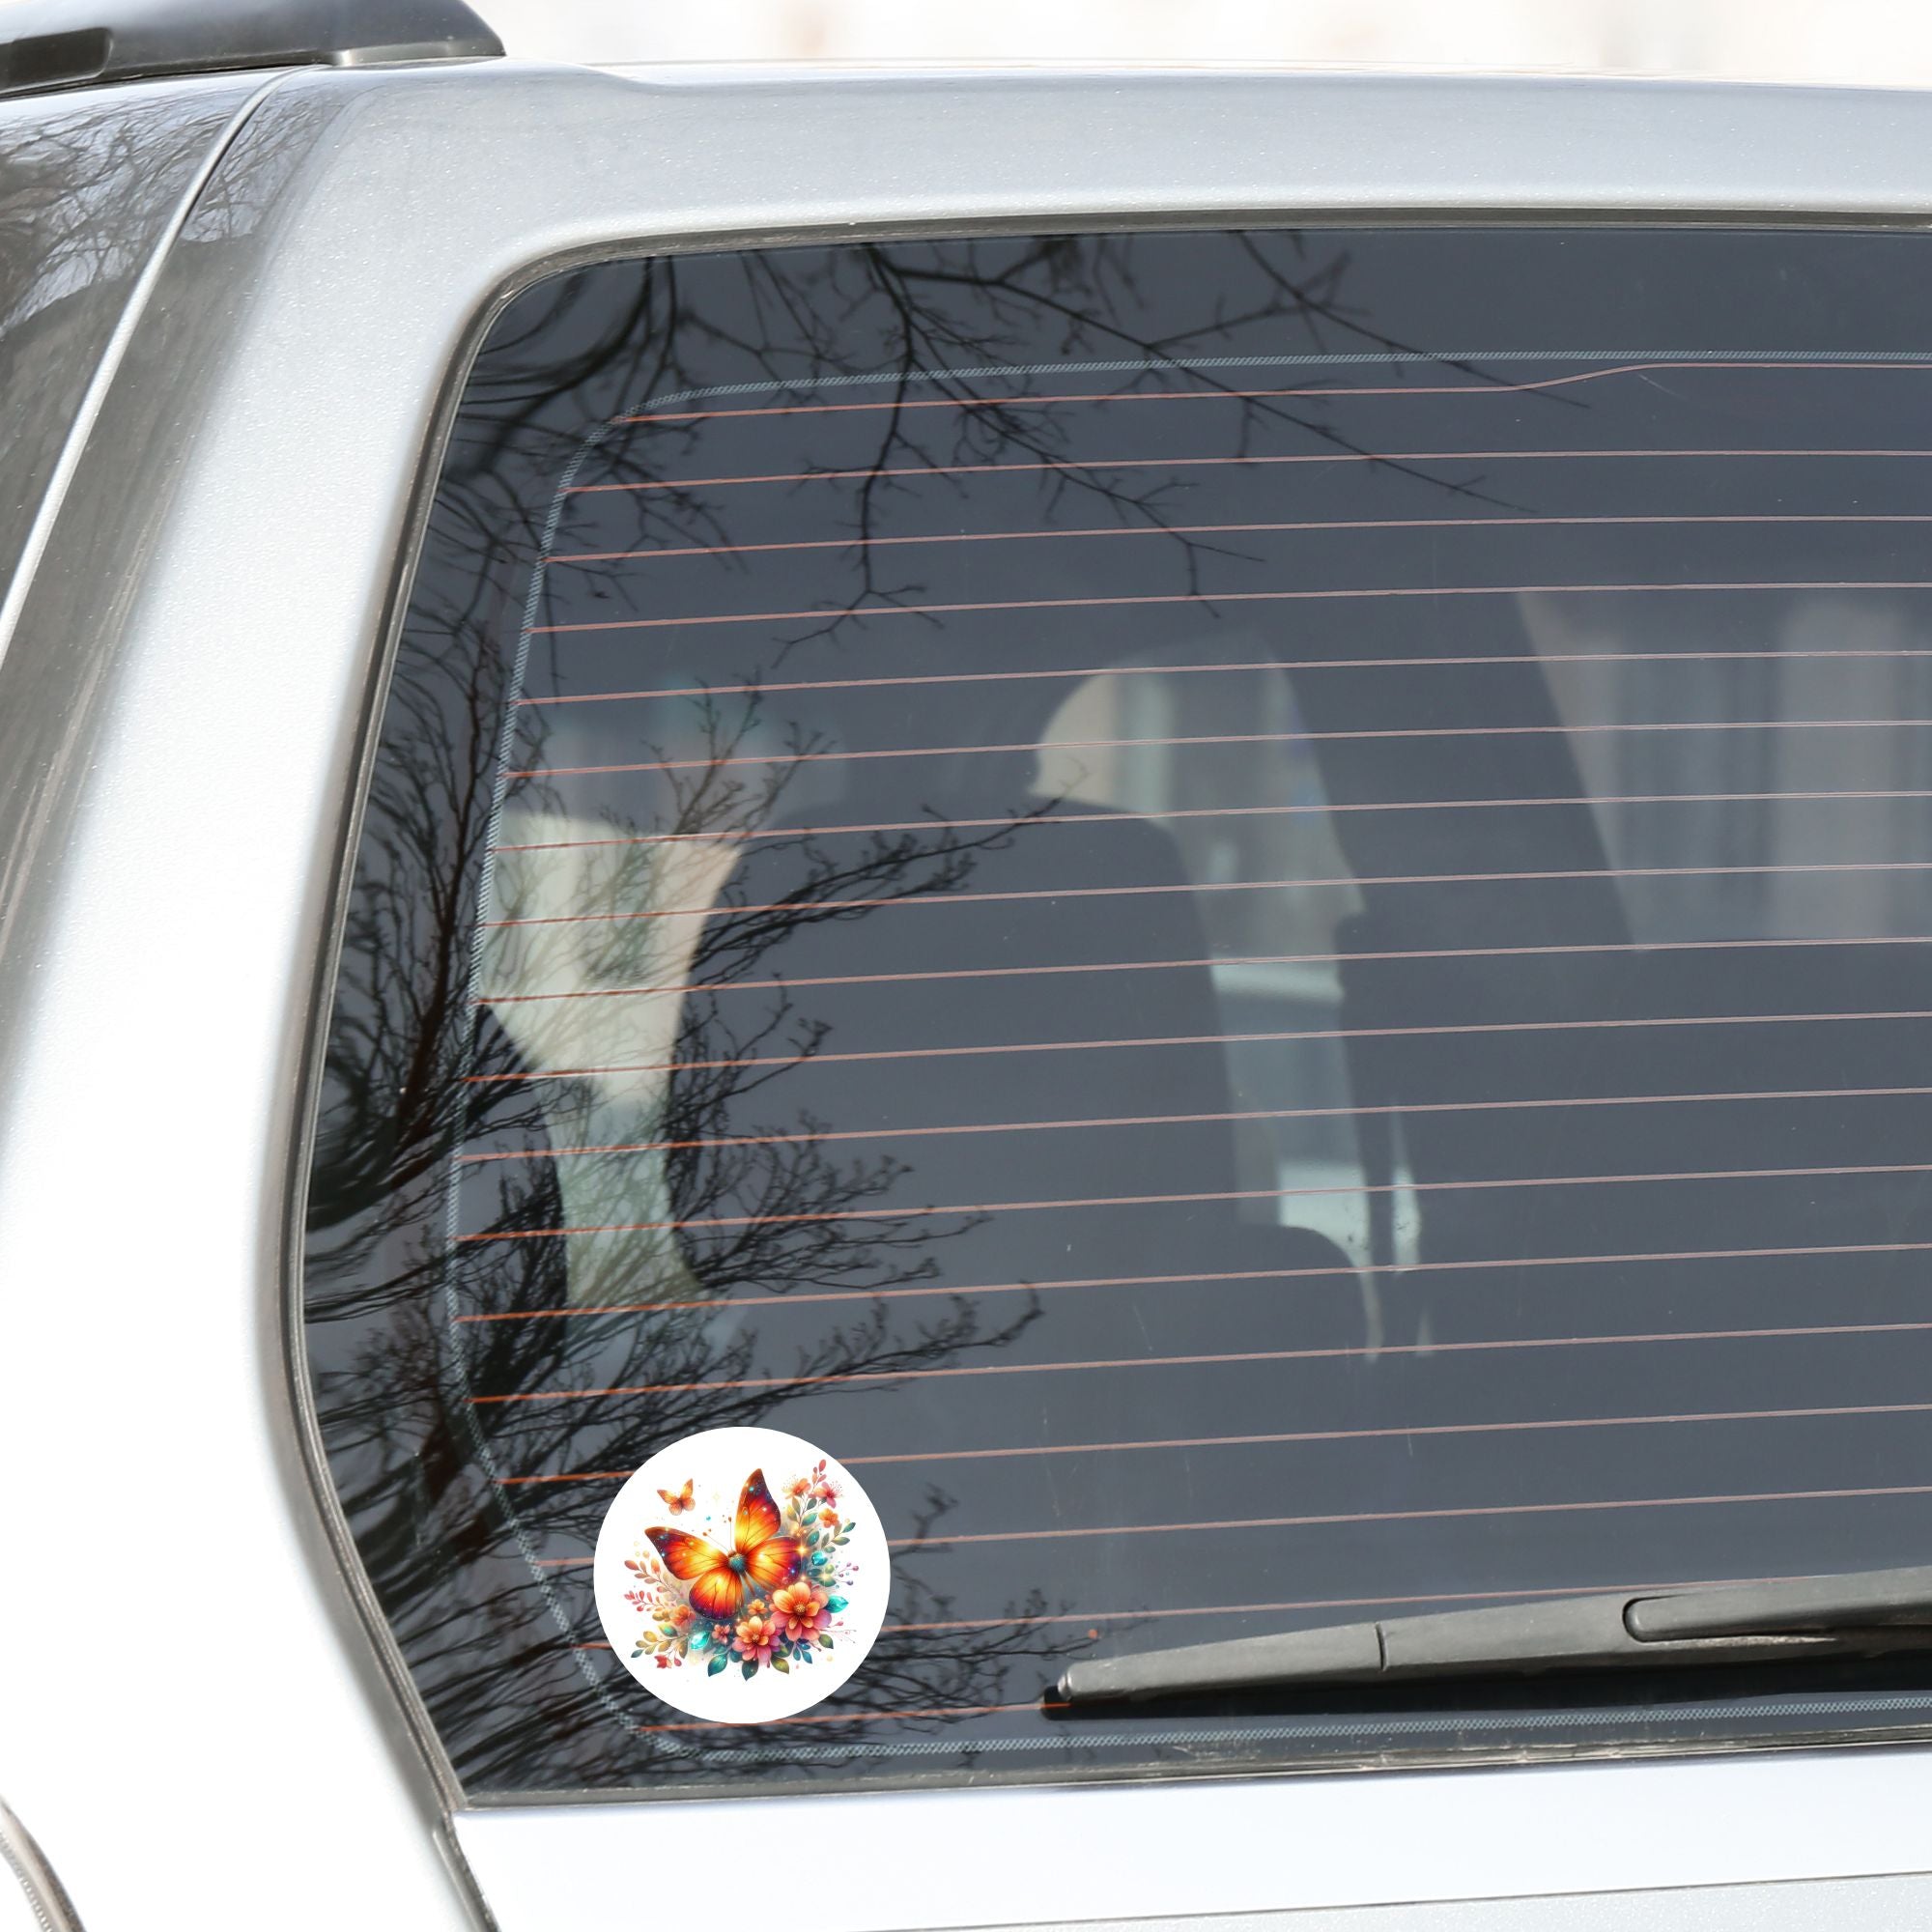 This image shows the Orange Butterfly with Stars Die-Cut Sticker on the back window of a car.